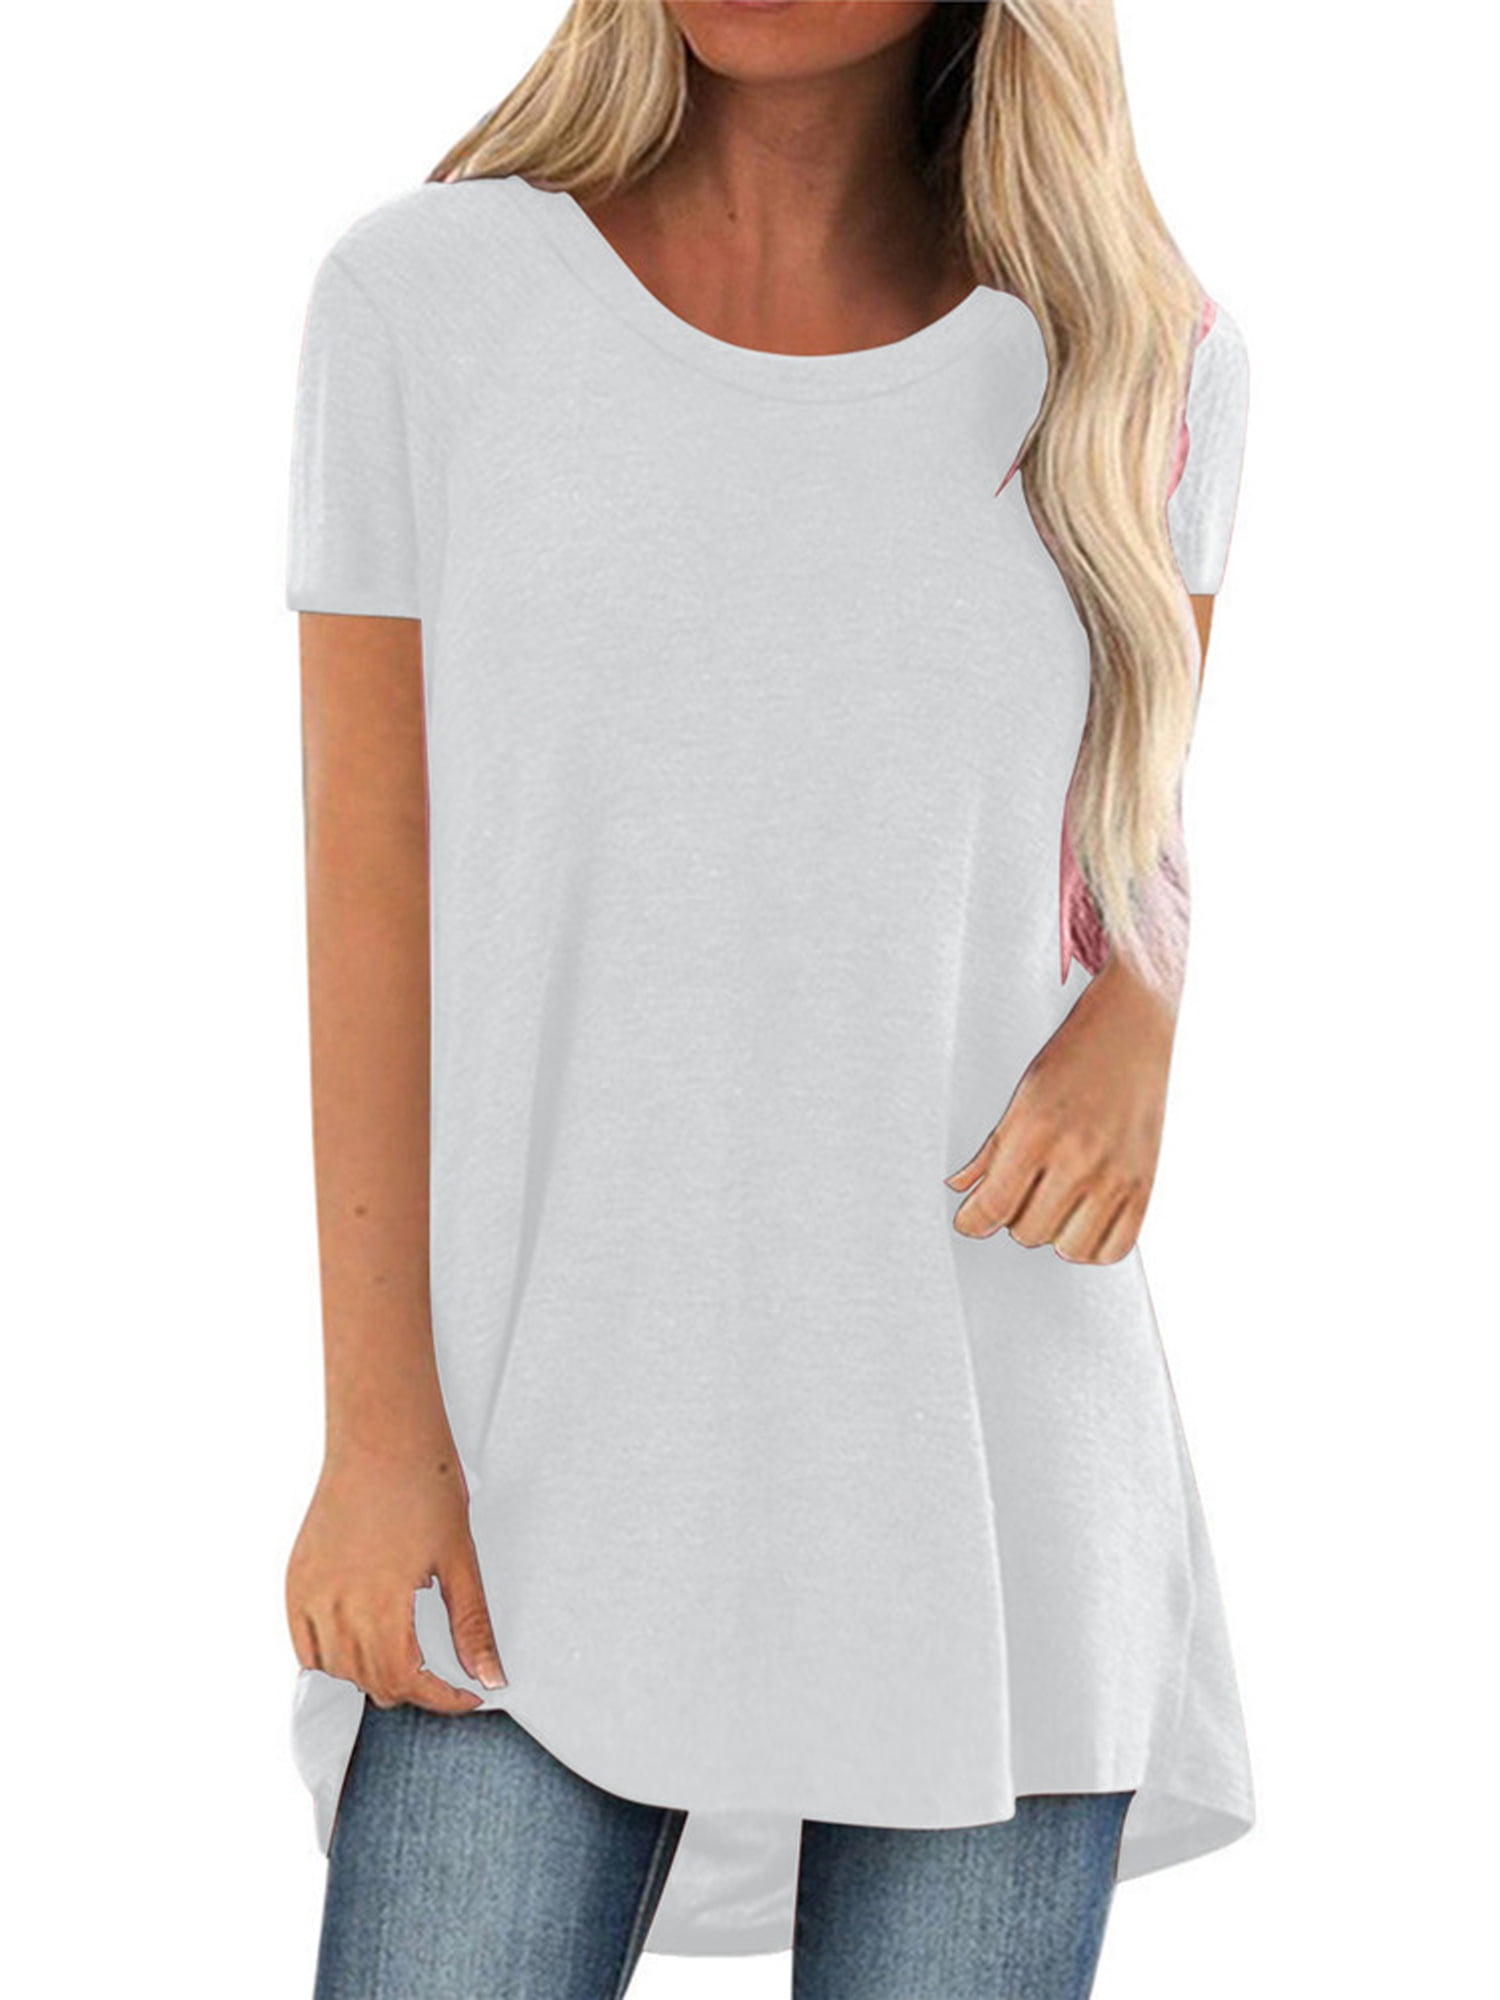 Women's Short Sleeve T Shirt Plus Size Tops Casual V Neck Tunic Loose ...